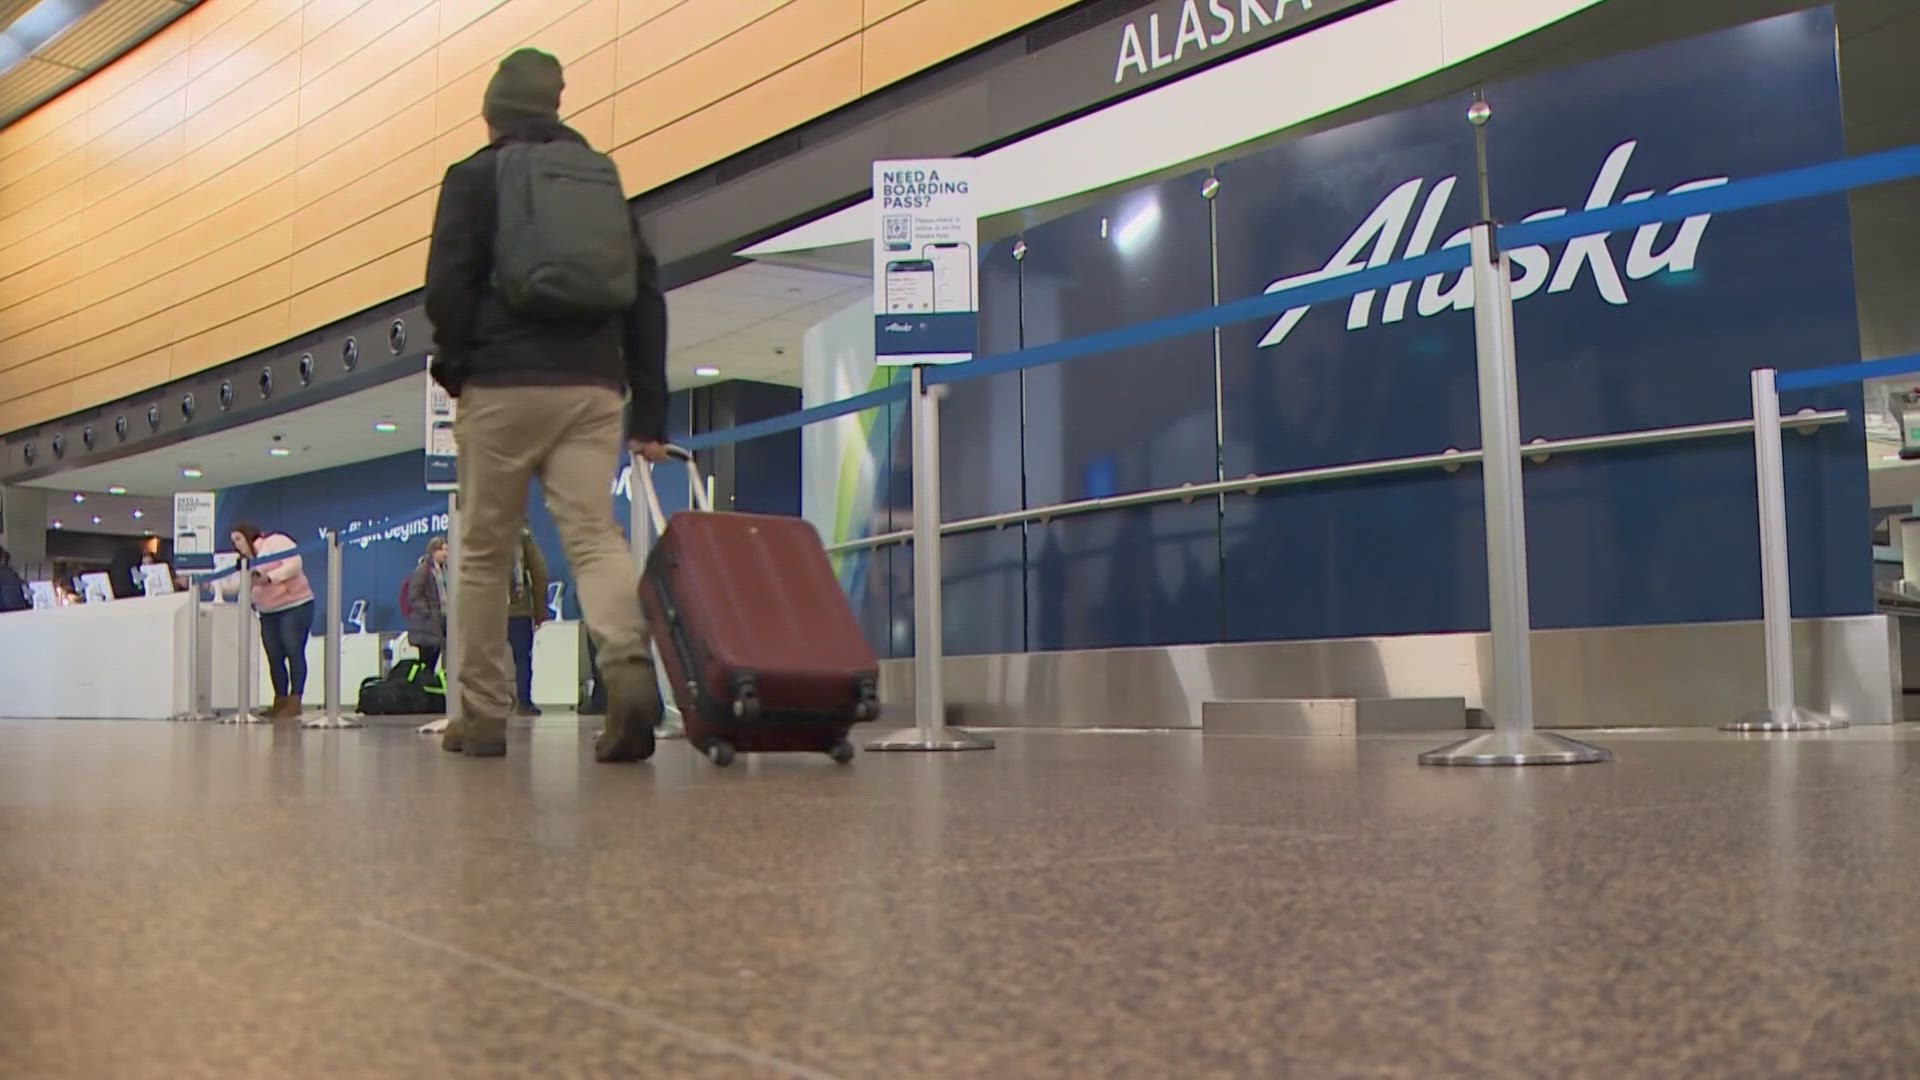 Alaska Airlines announced Friday it has canceled flights through Tuesday pending inspection instructions from the FAA and Boeing.